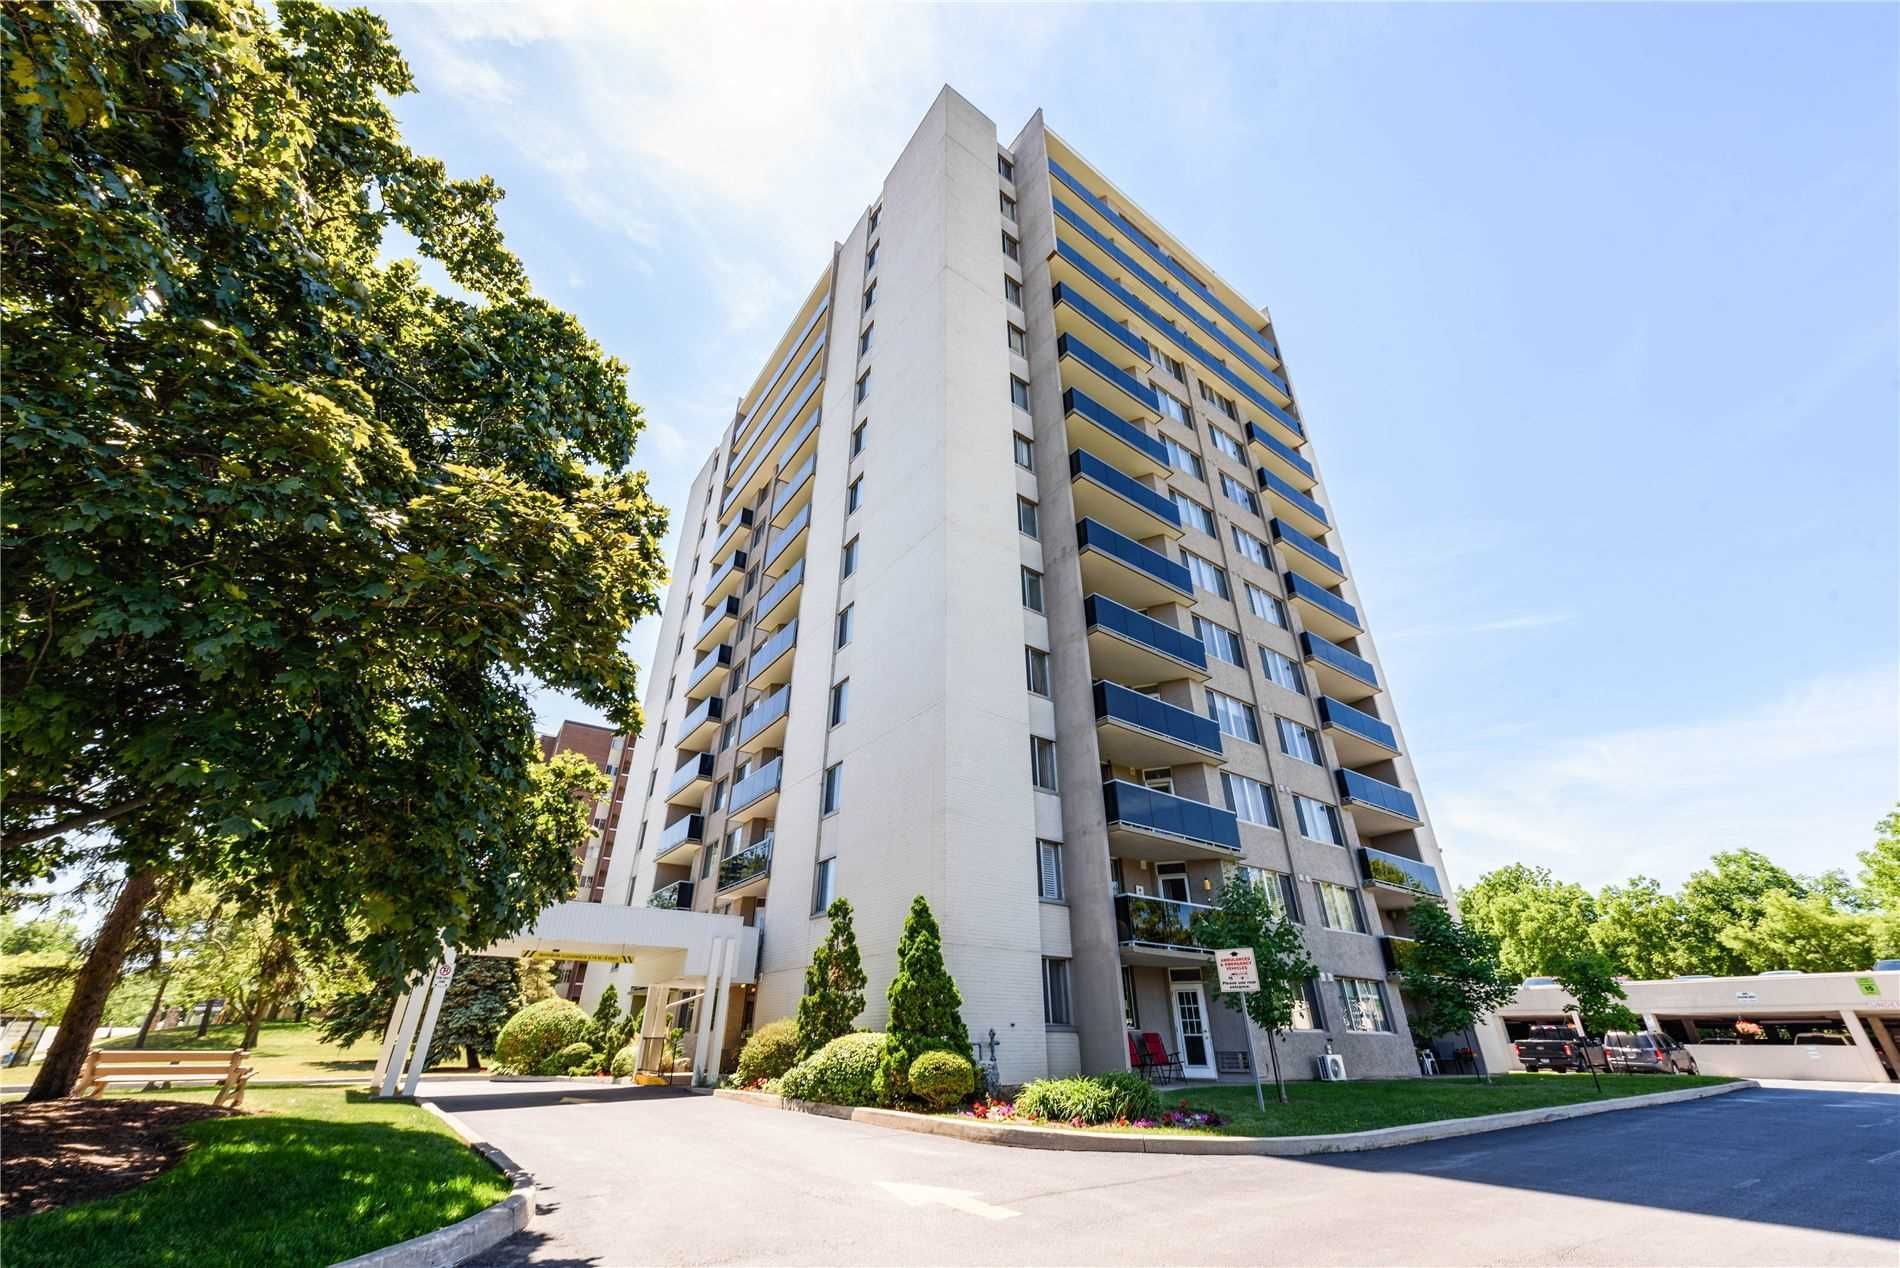 81 Millside Dr. This condo at 81 Millside Drive Condos is located in  Milton, Toronto - image #1 of 3 by Strata.ca